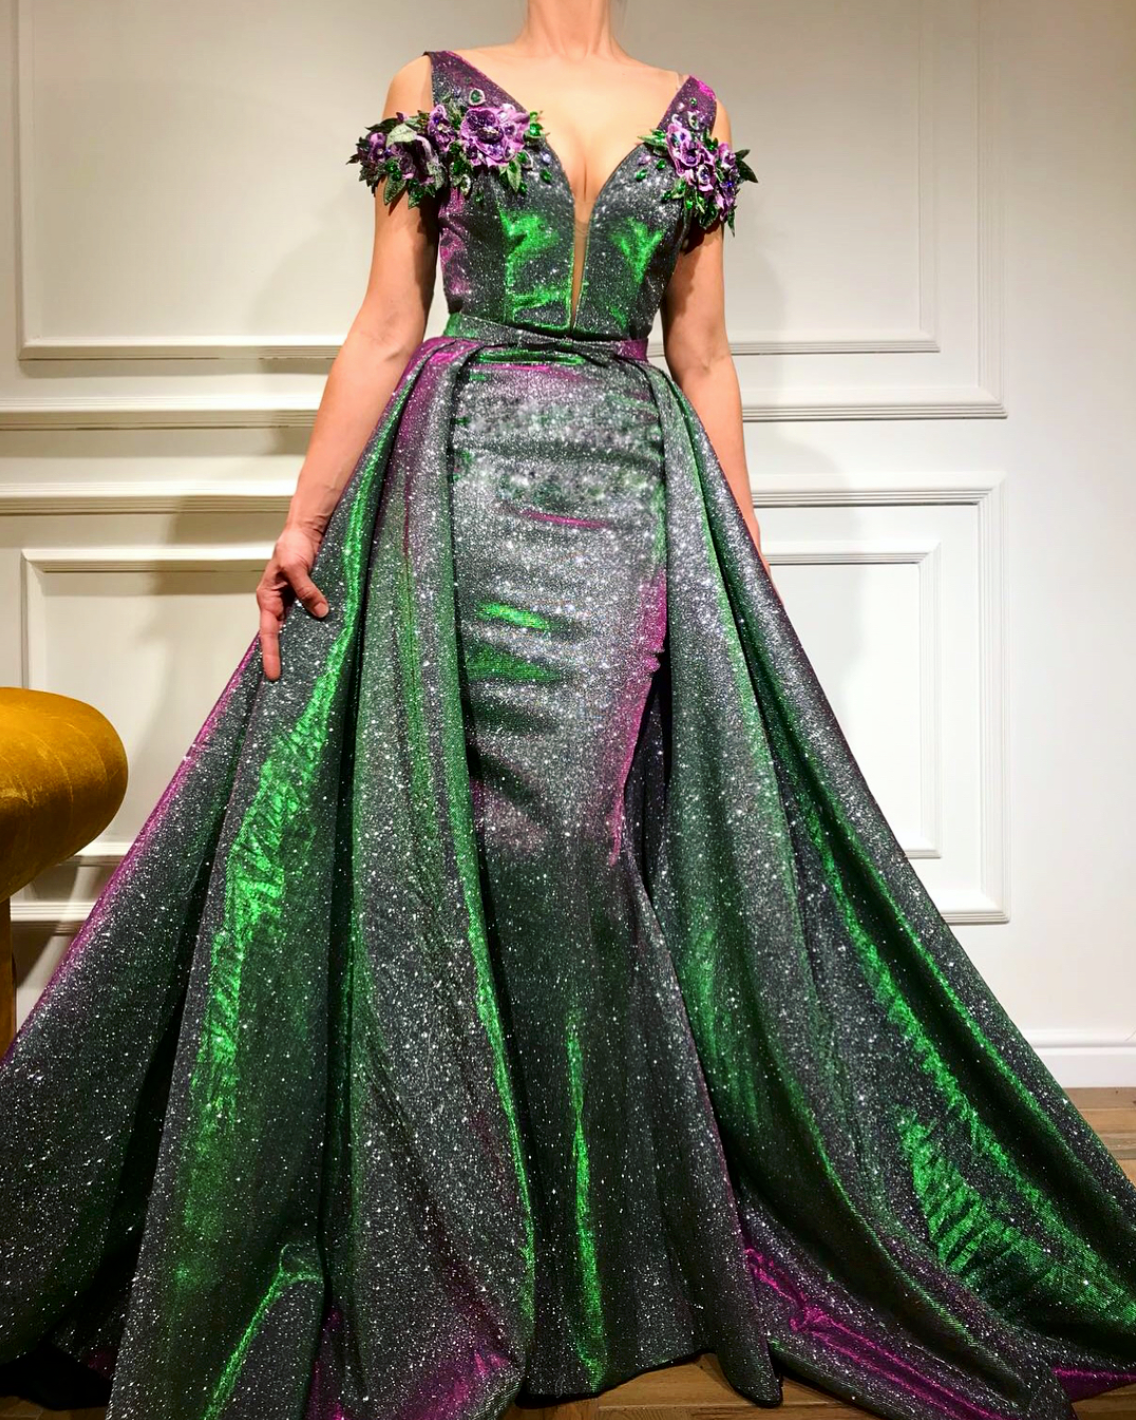 Green and purple overskirt dress with straps, off the shoulder sleeves, v-neck and embroidery